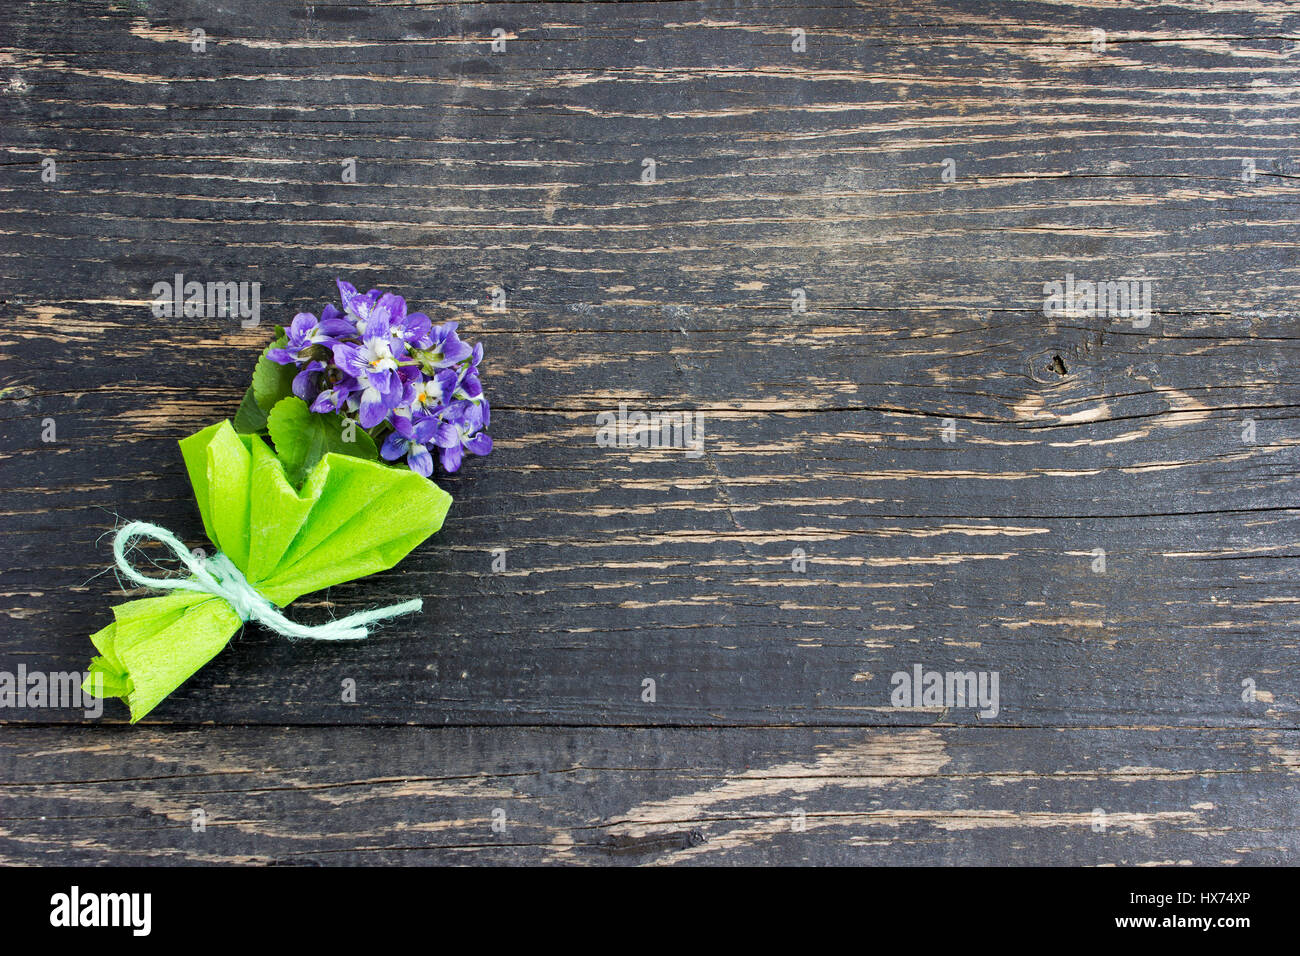 Bouquet of violets in the dark wooden surface Stock Photo